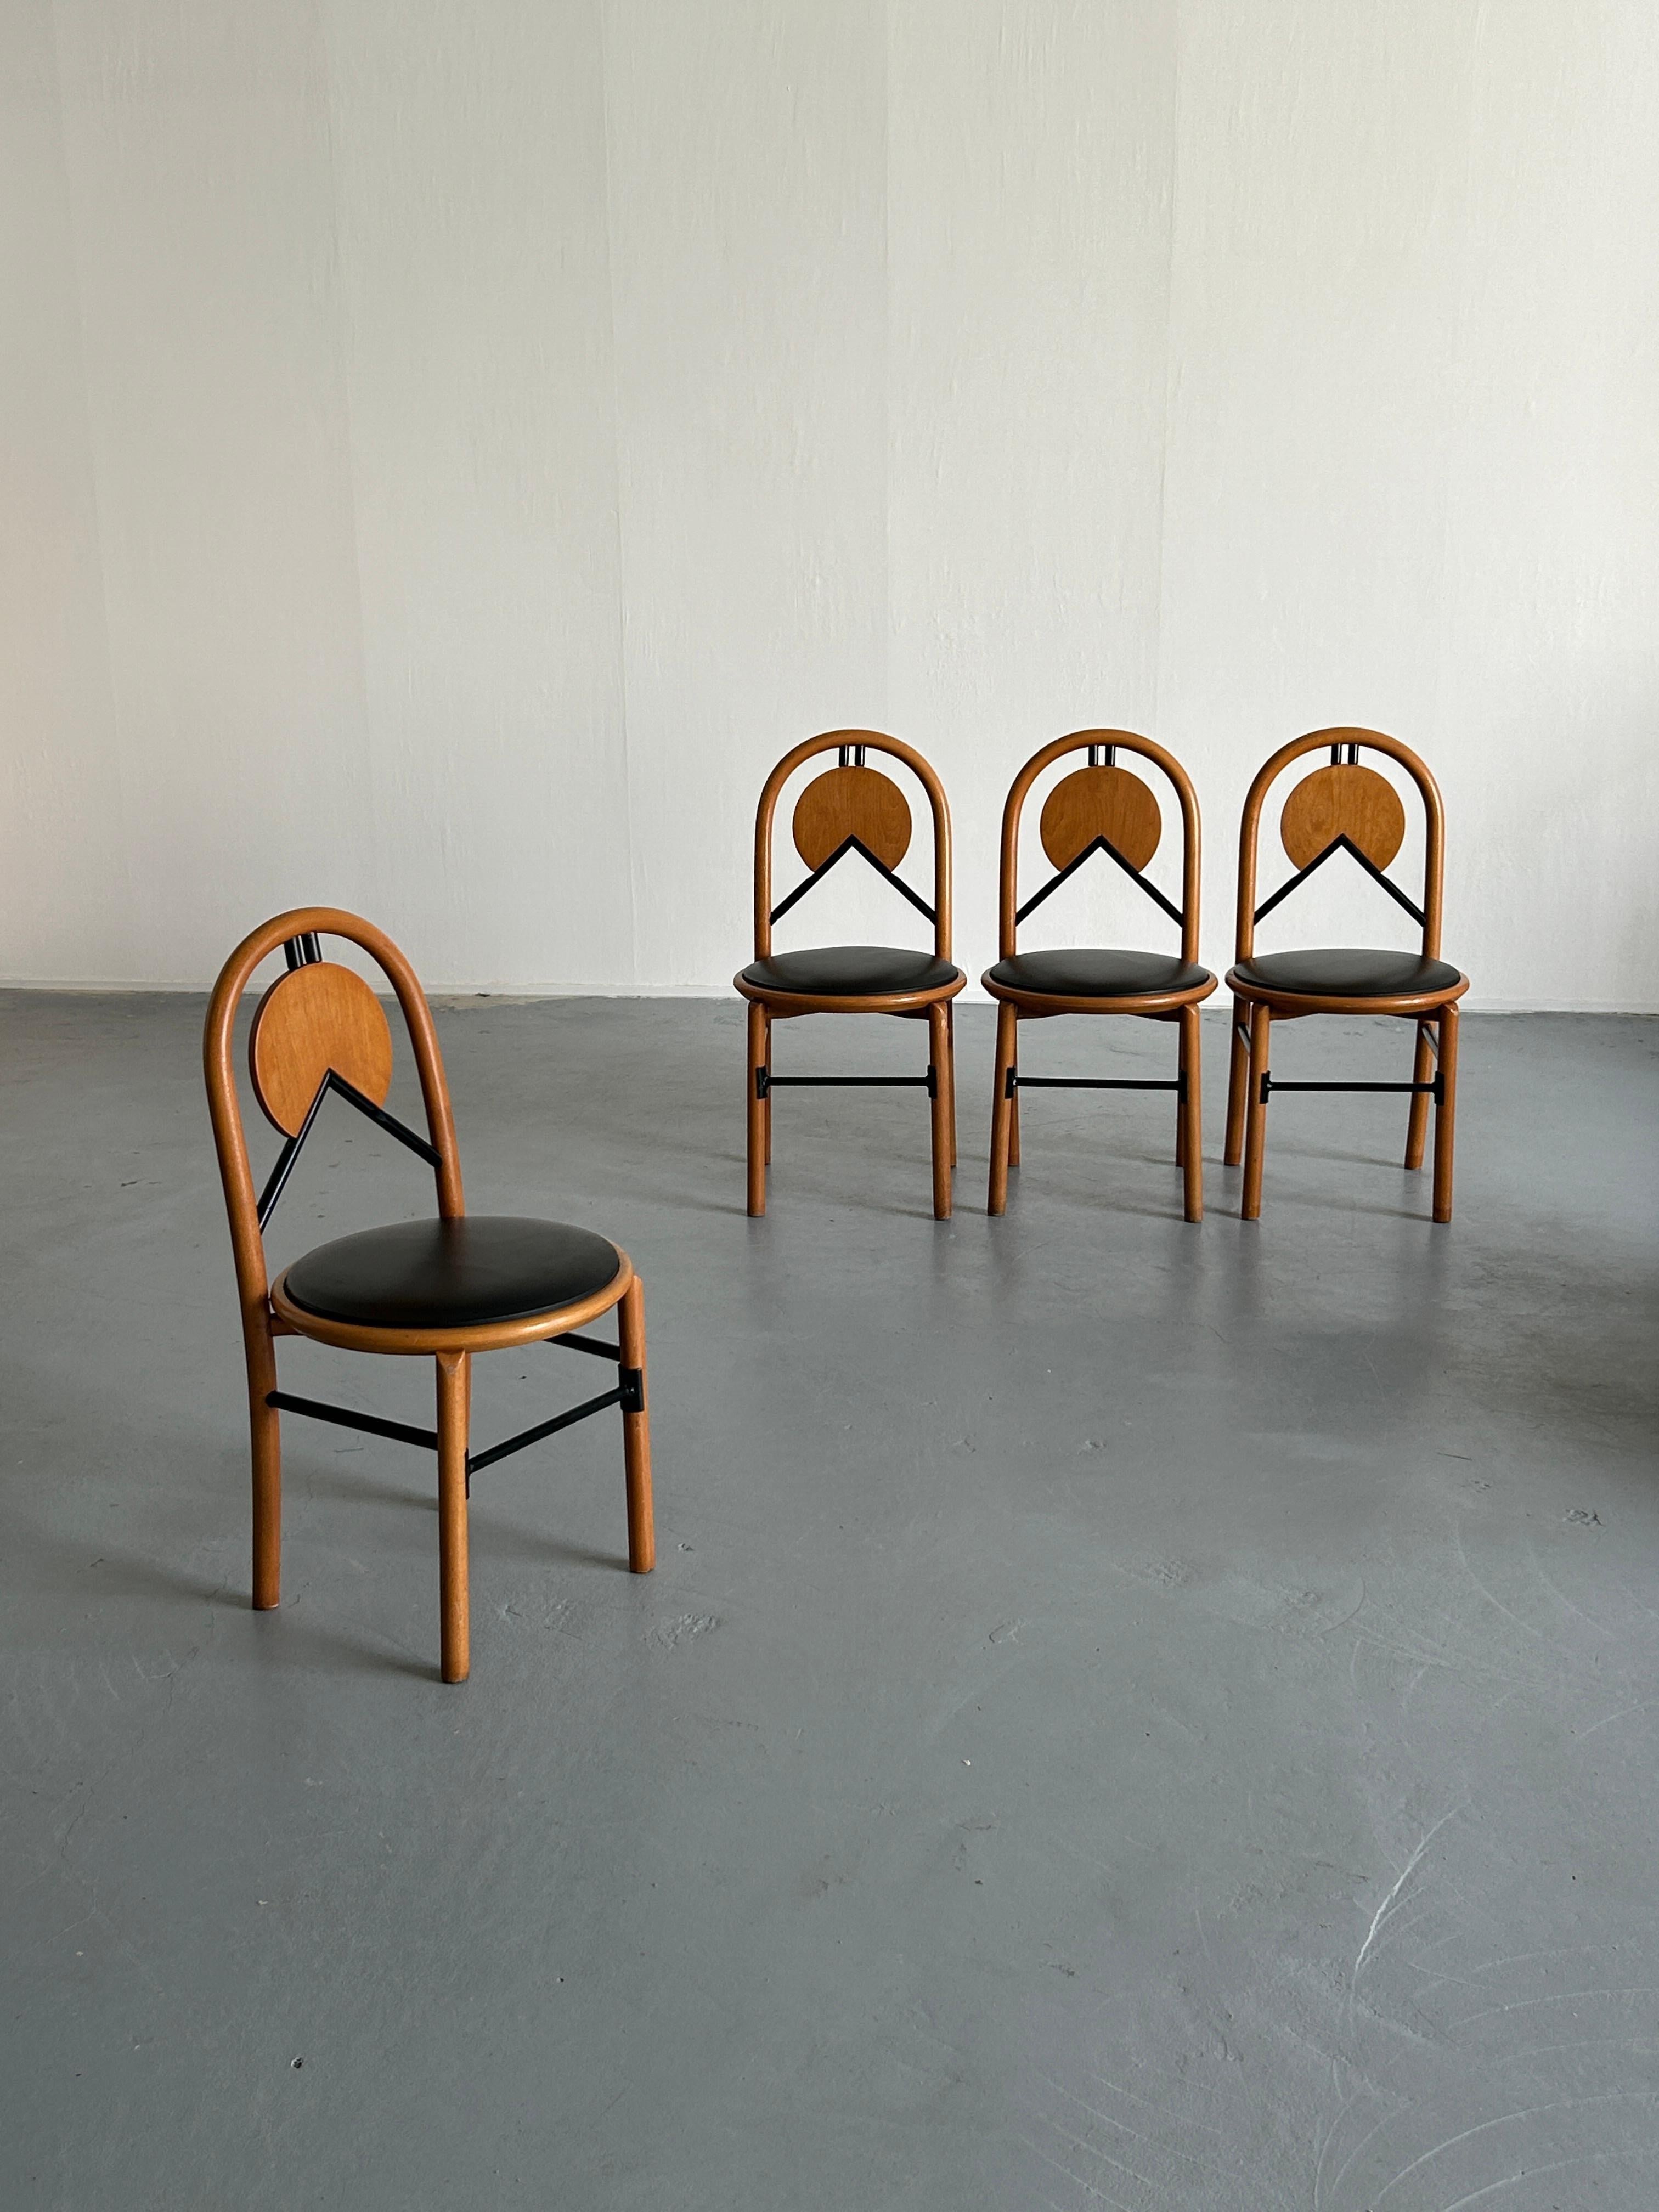 A set of four stunning vintage Italian postmodernist chairs, following the Memphis Milano style.
Unknown Italian production, late 1980s or early 1990s.
Overall, the chairs are well preserved, in original vintage condition and with expected signs of